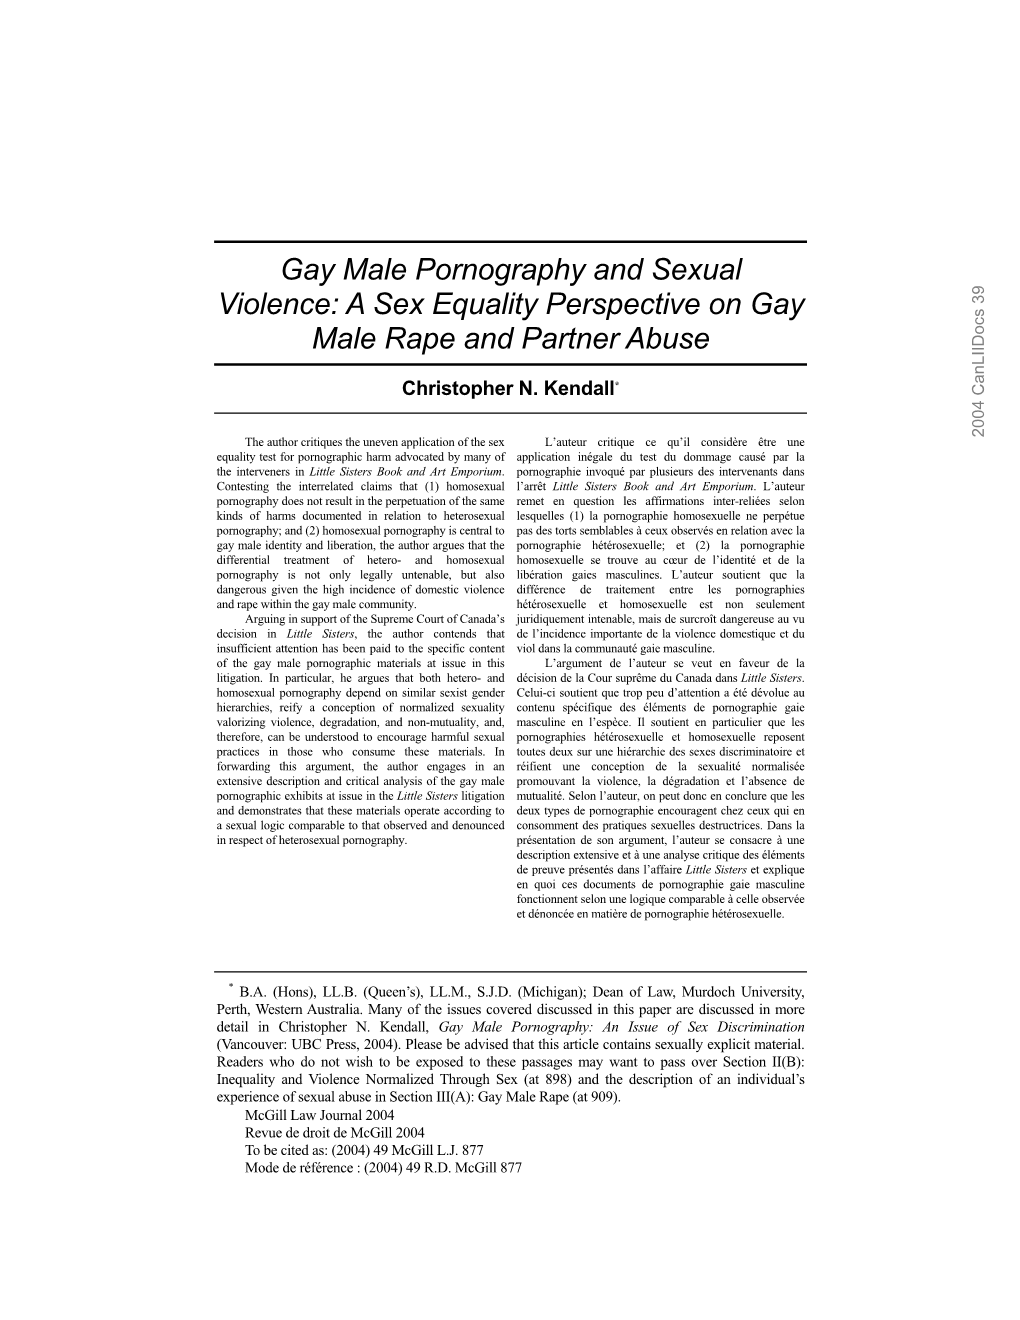 Gay Male Pornography and Sexual Violence: a Sex Equality Perspective on Gay Male Rape and Partner Abuse